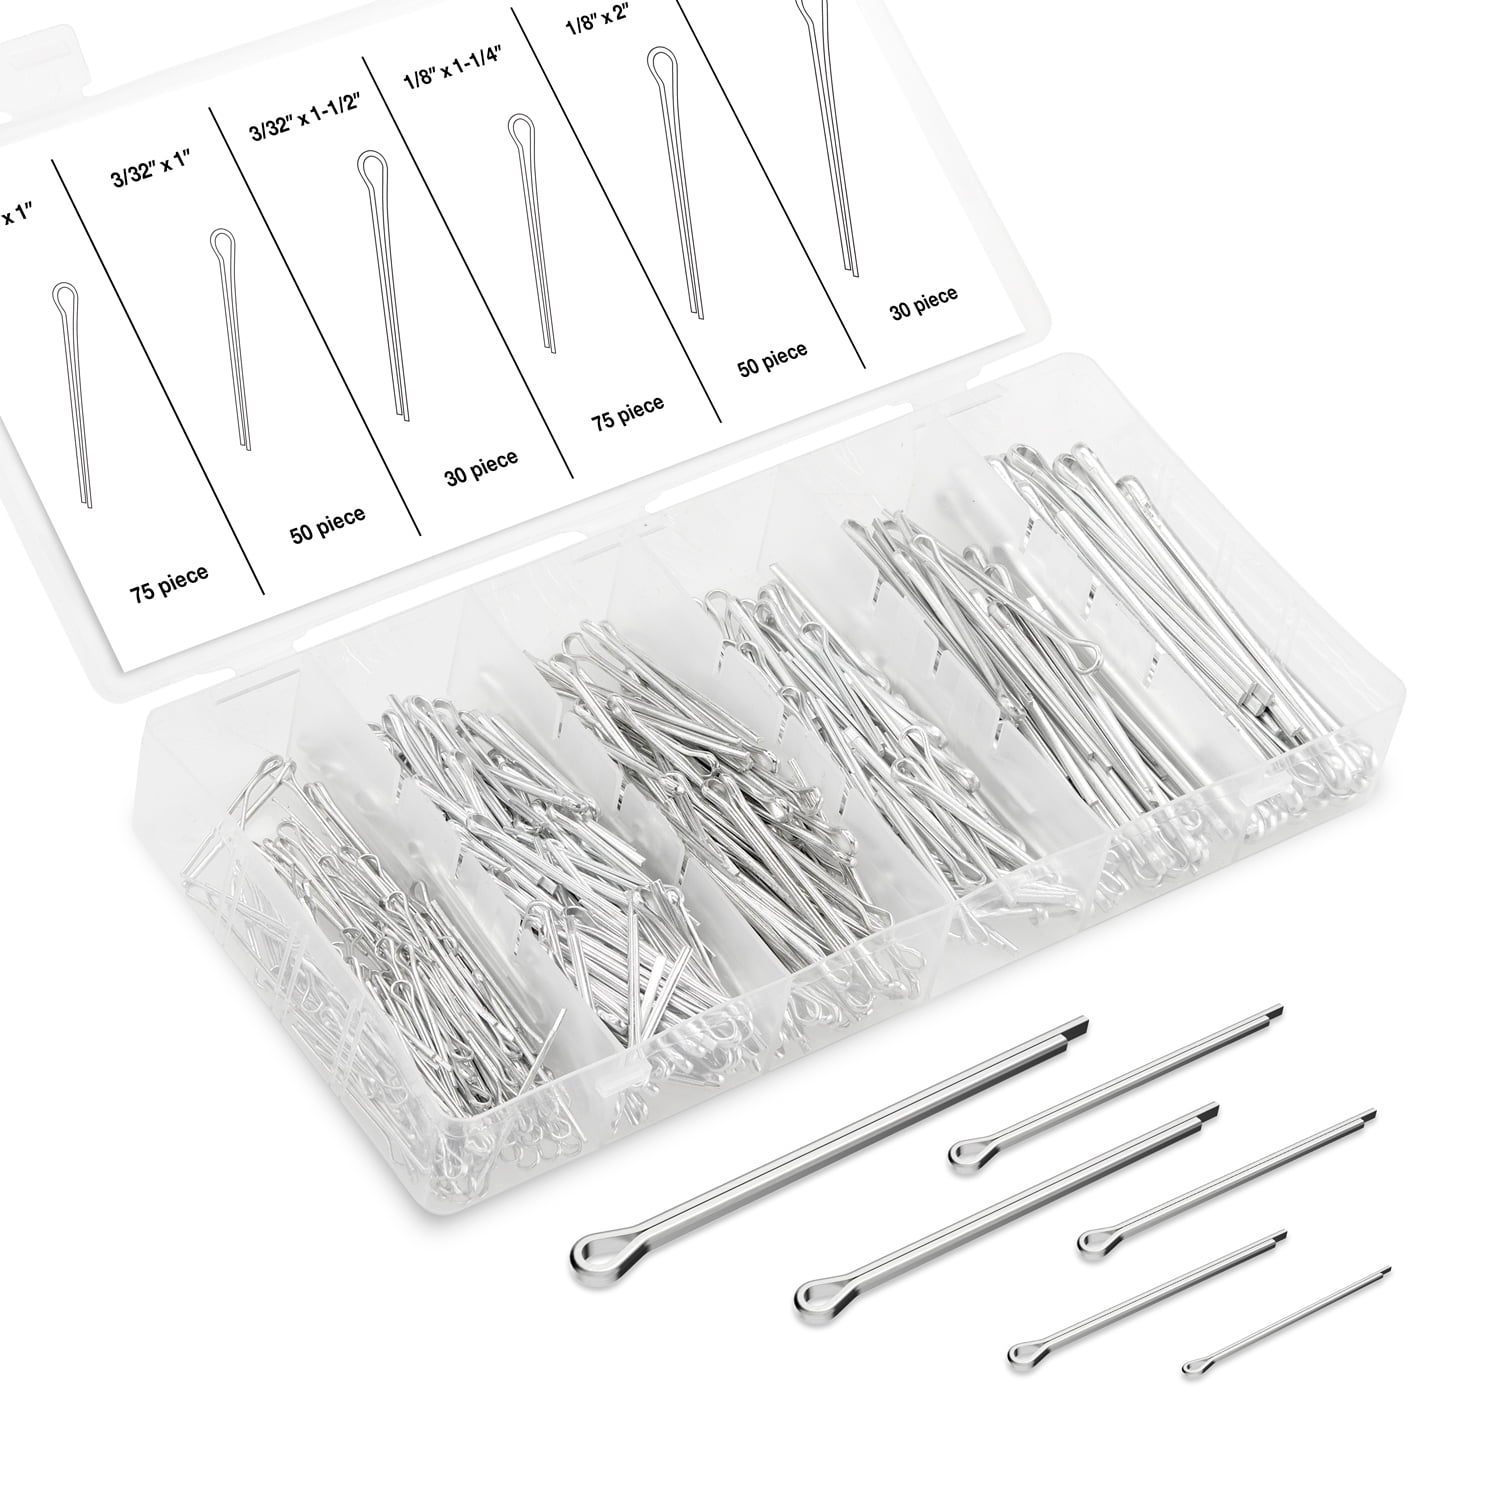 555PC Cotter Pin Clip Key Fitting Assortment Tool Kit Set w/ Case Container Box 